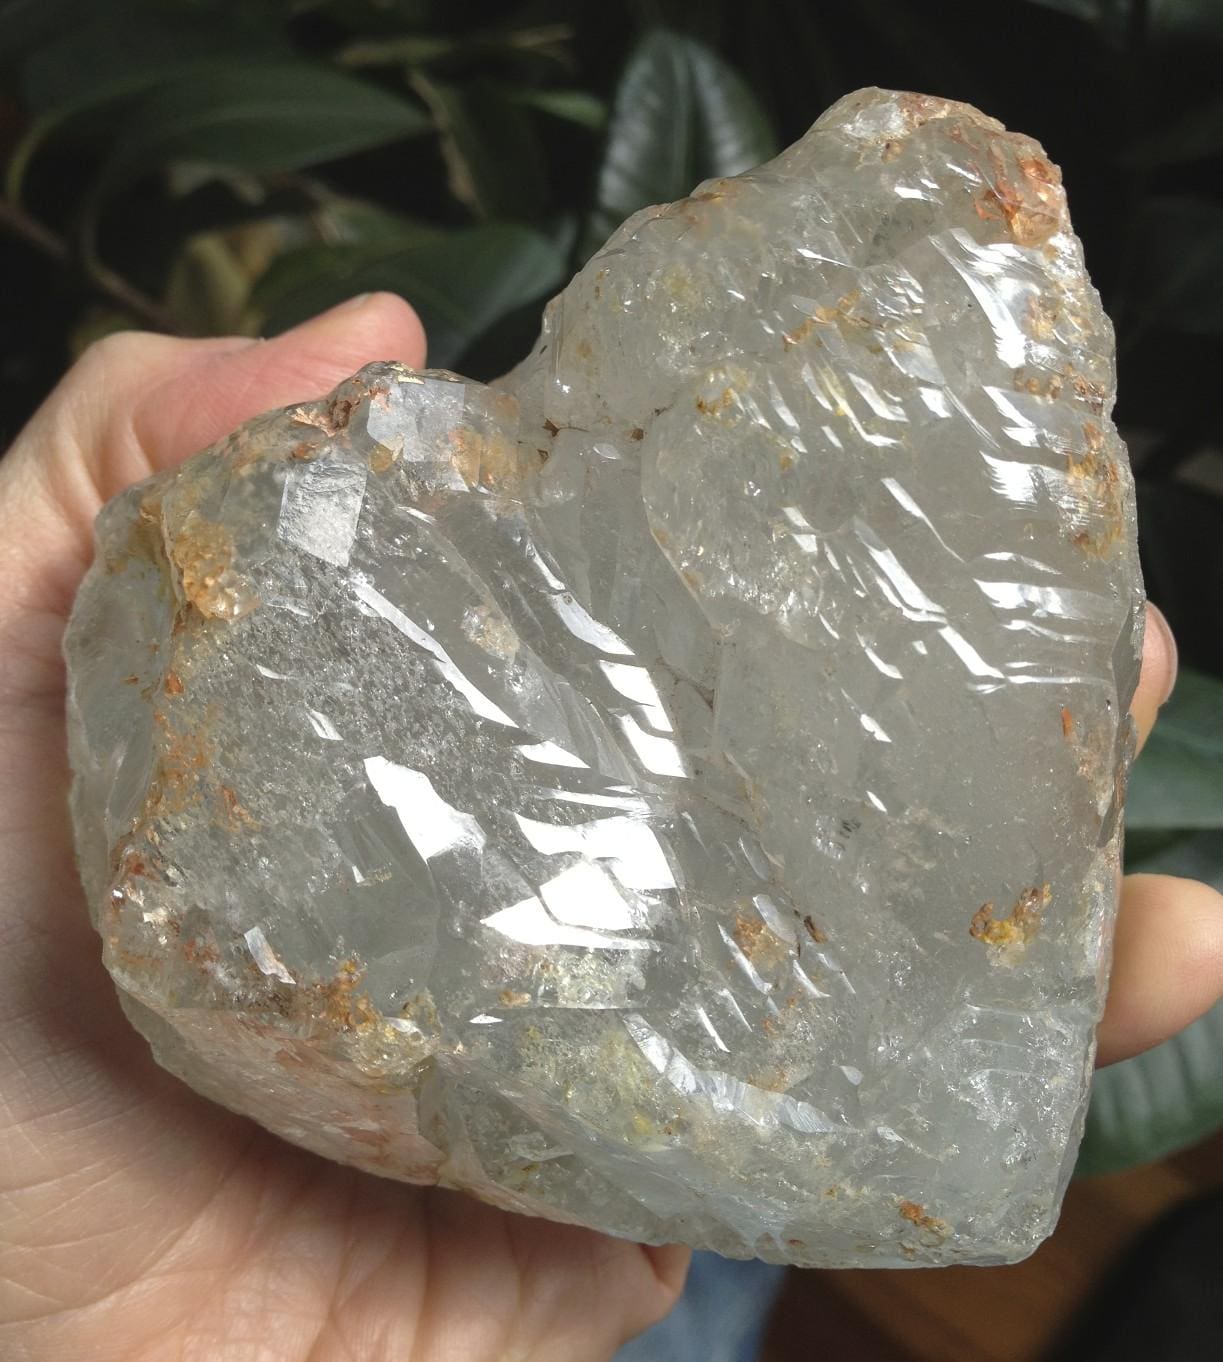 Large, beautifully terminated Topaz - the intrabody neural communicator - facilitating your body talk and internal functioning.